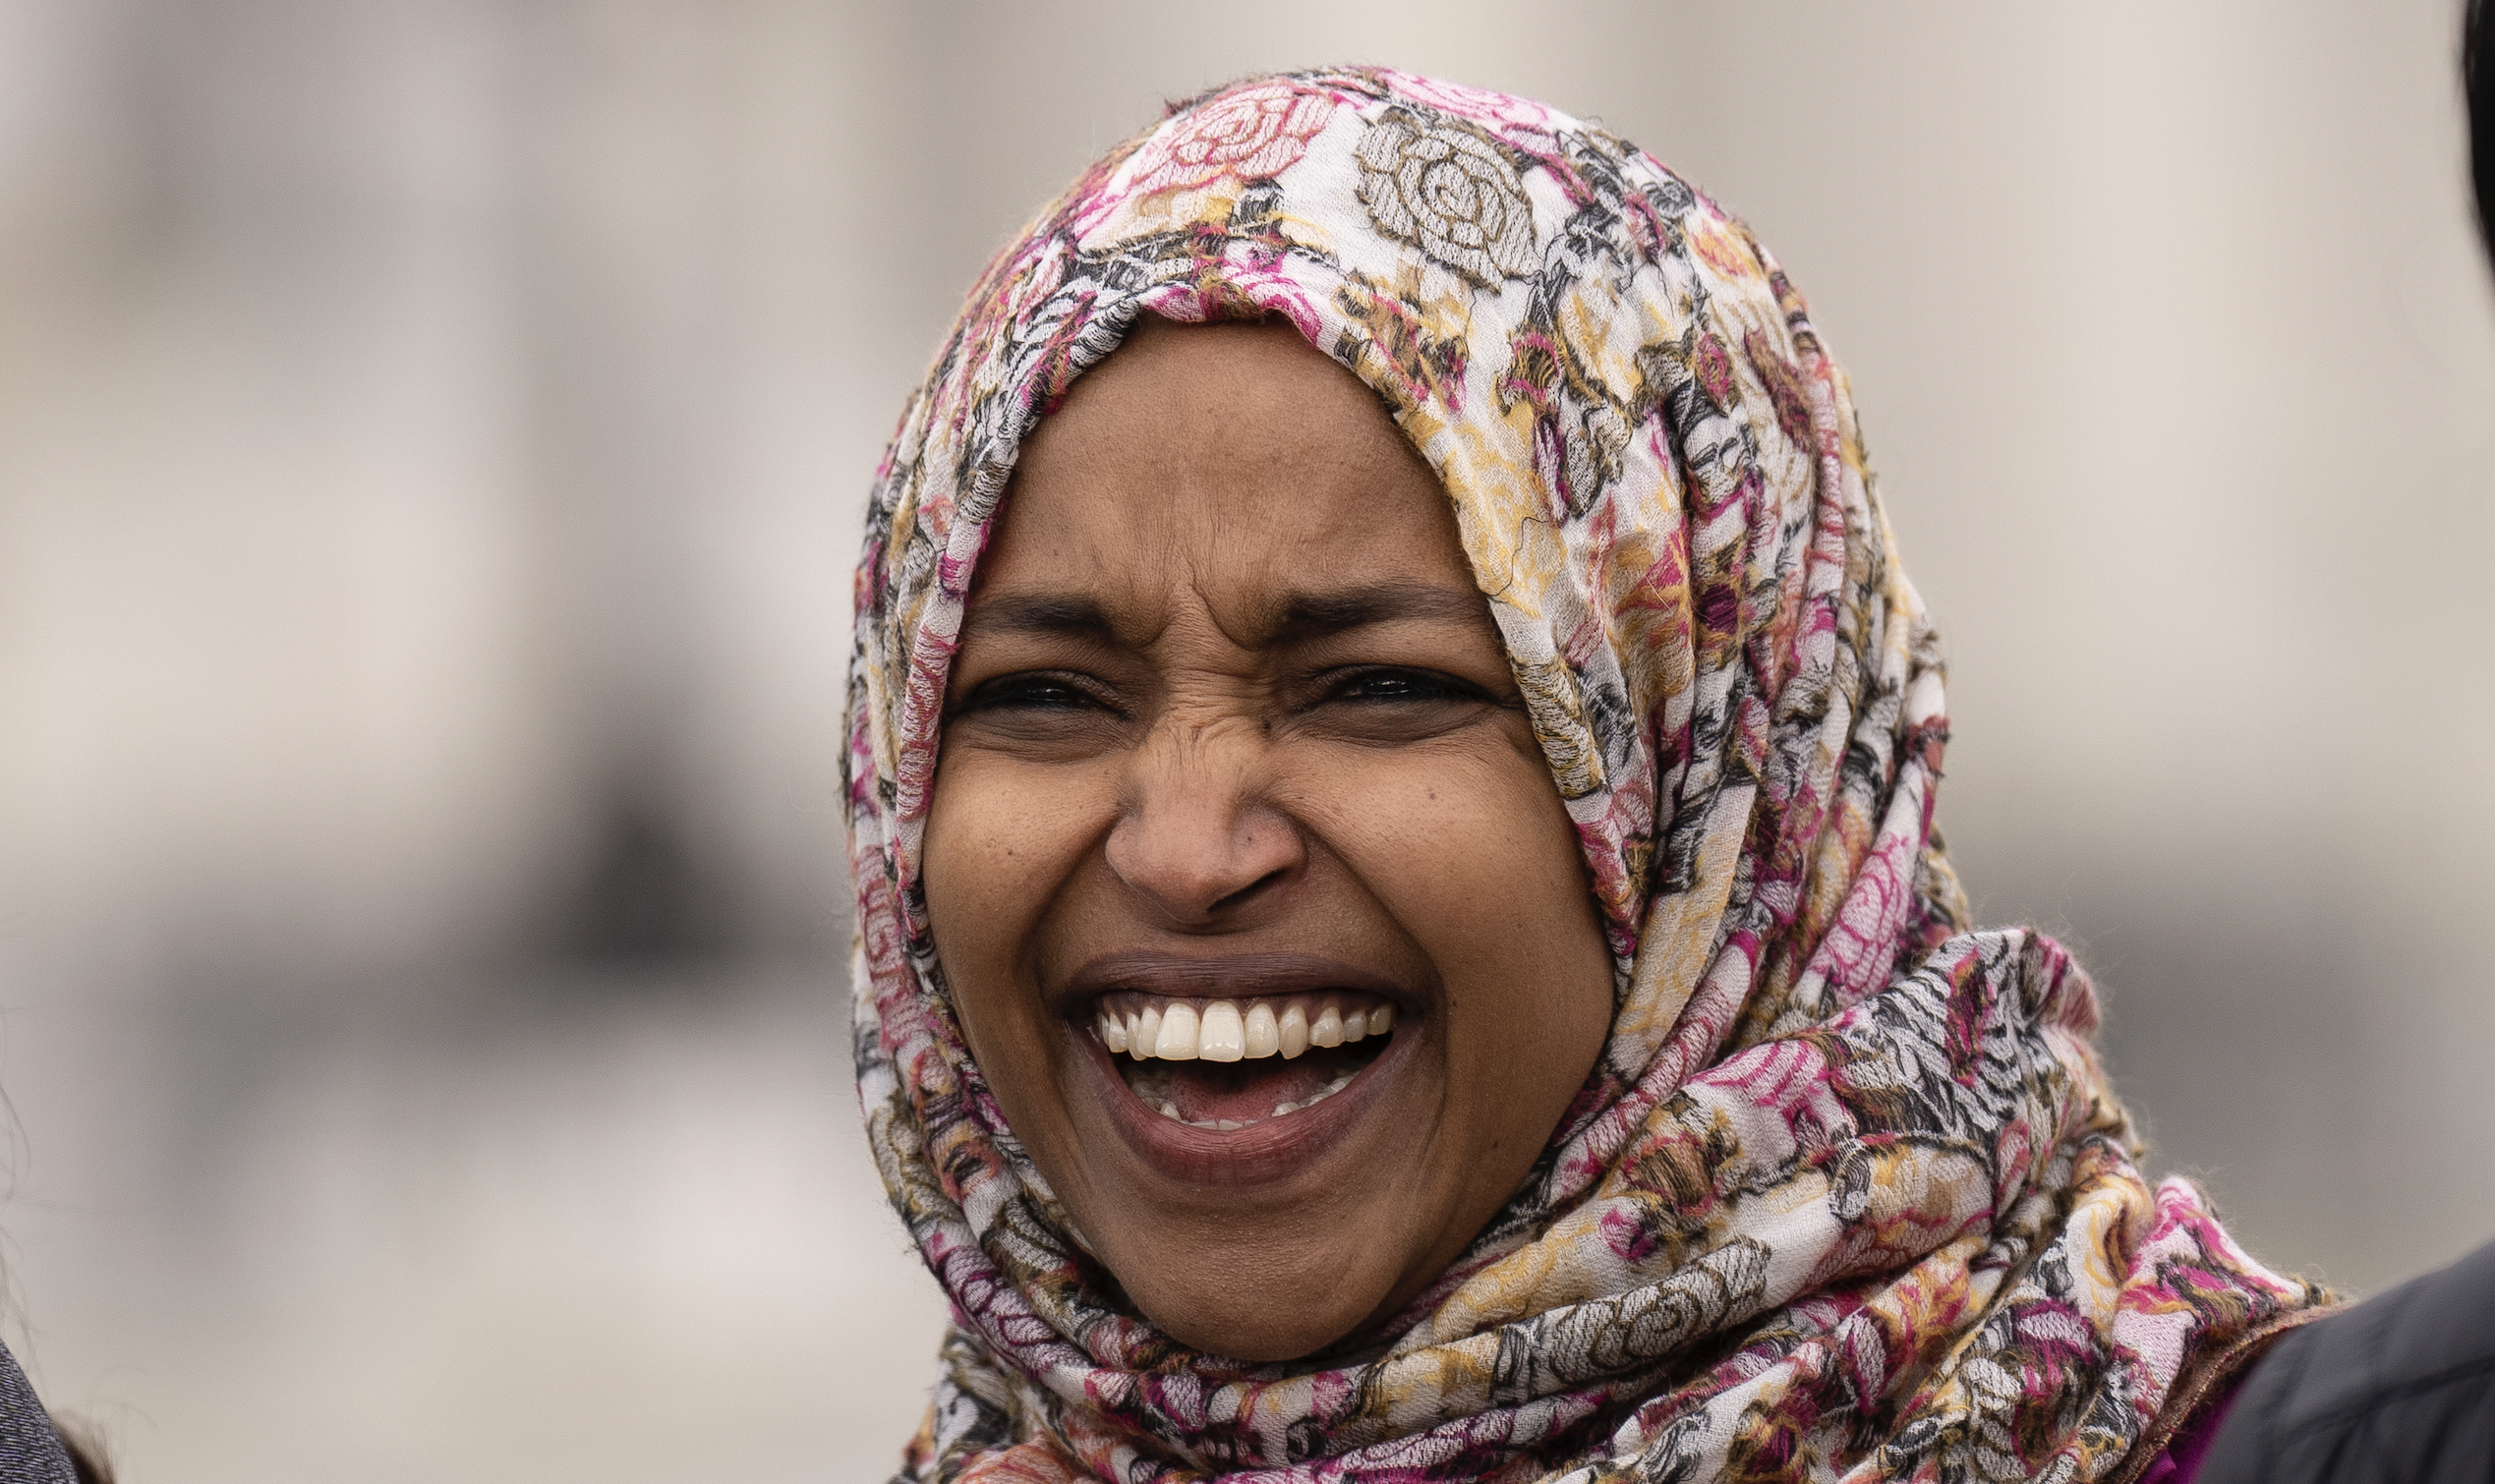 Ilhan Omar expresses pride in daughter arrested at anti-Israel protest